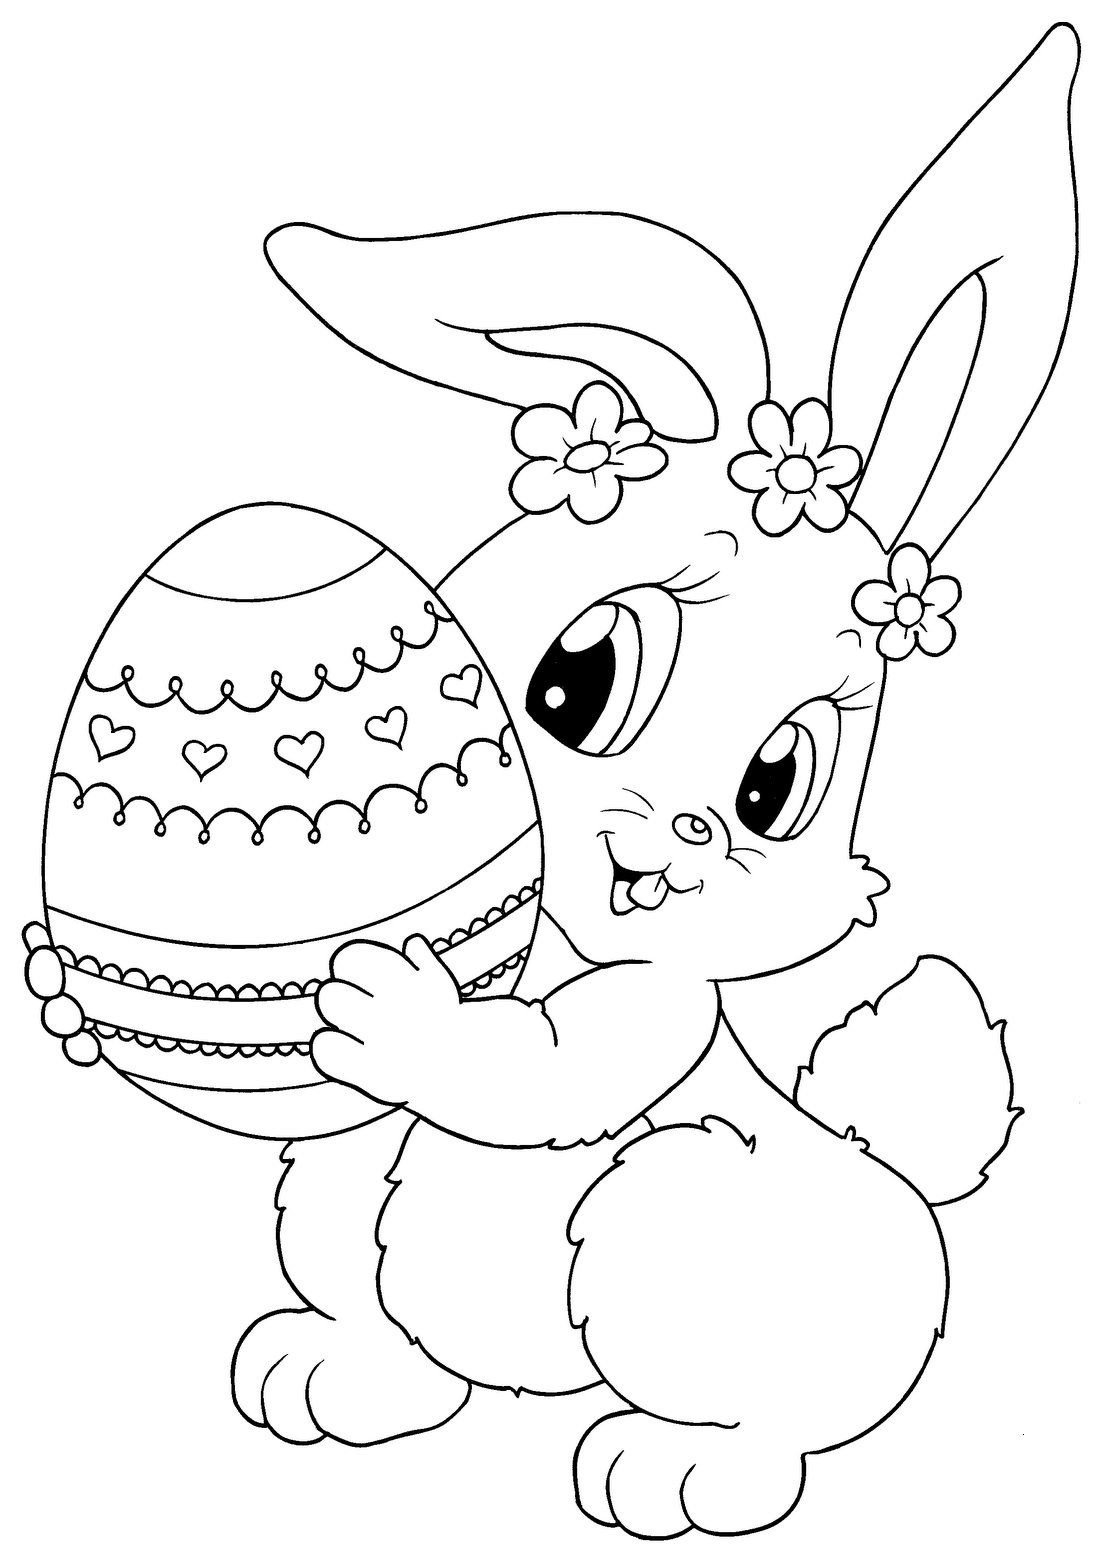 Top 15 Free Printable Easter Bunny Coloring Pages Online | Зентангл - Free Printable Easter Drawings